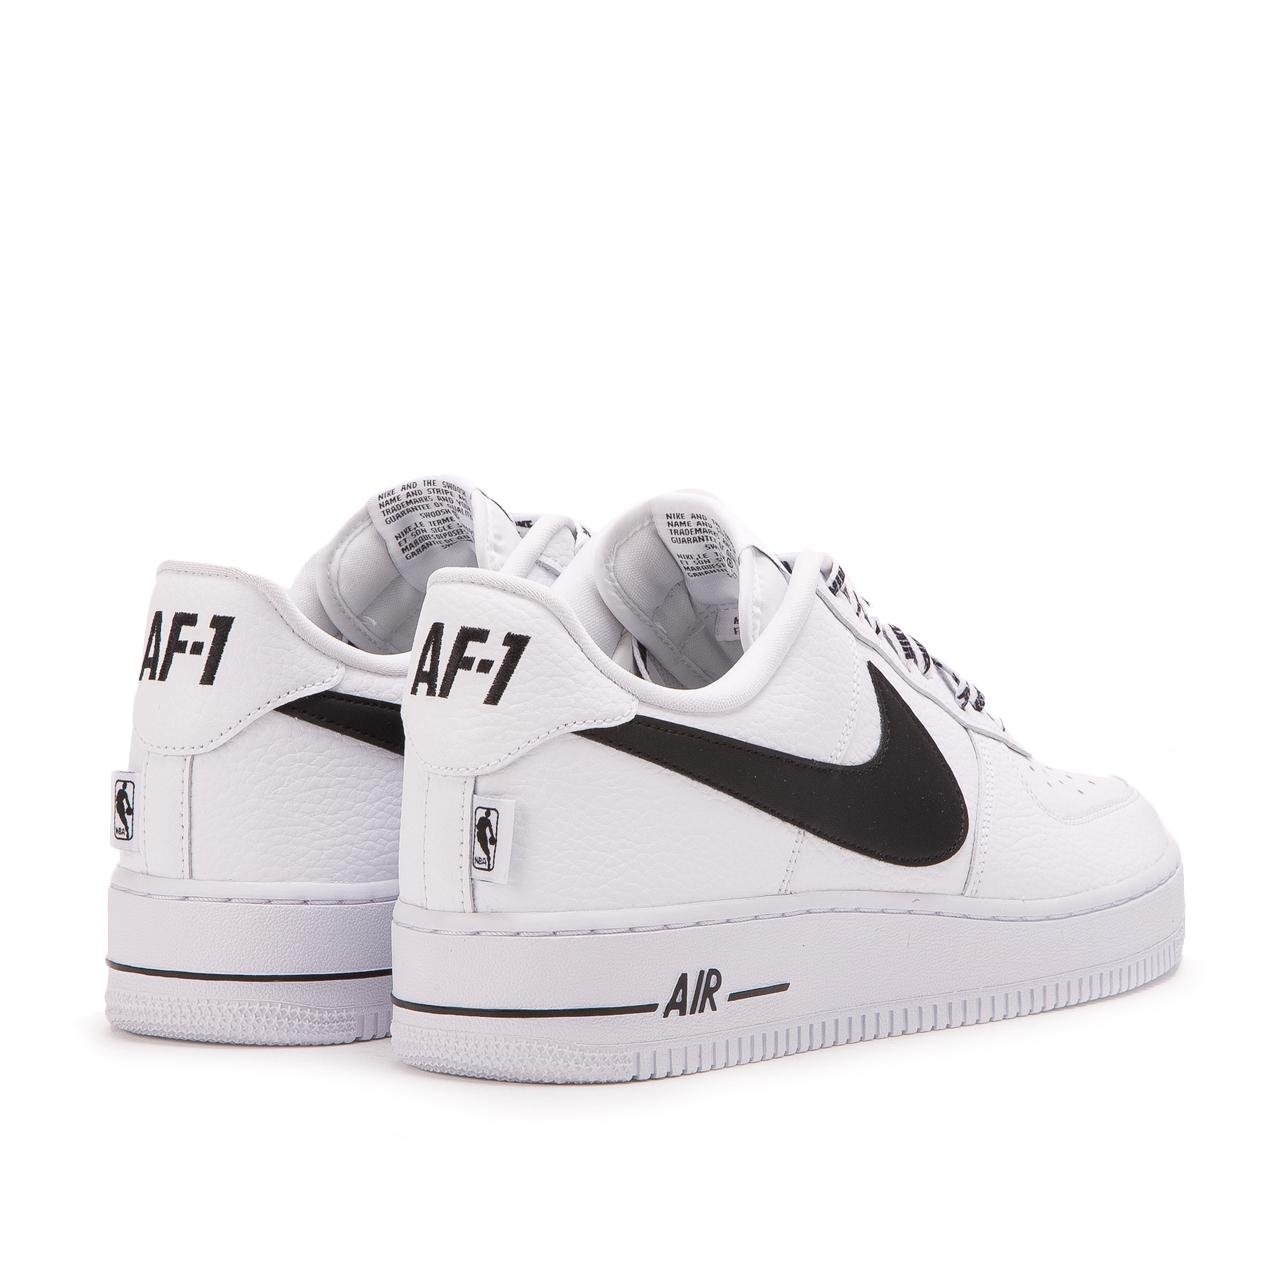 Nike Leather Nike Air Force 1 Low Nba Pack in White | Lyst